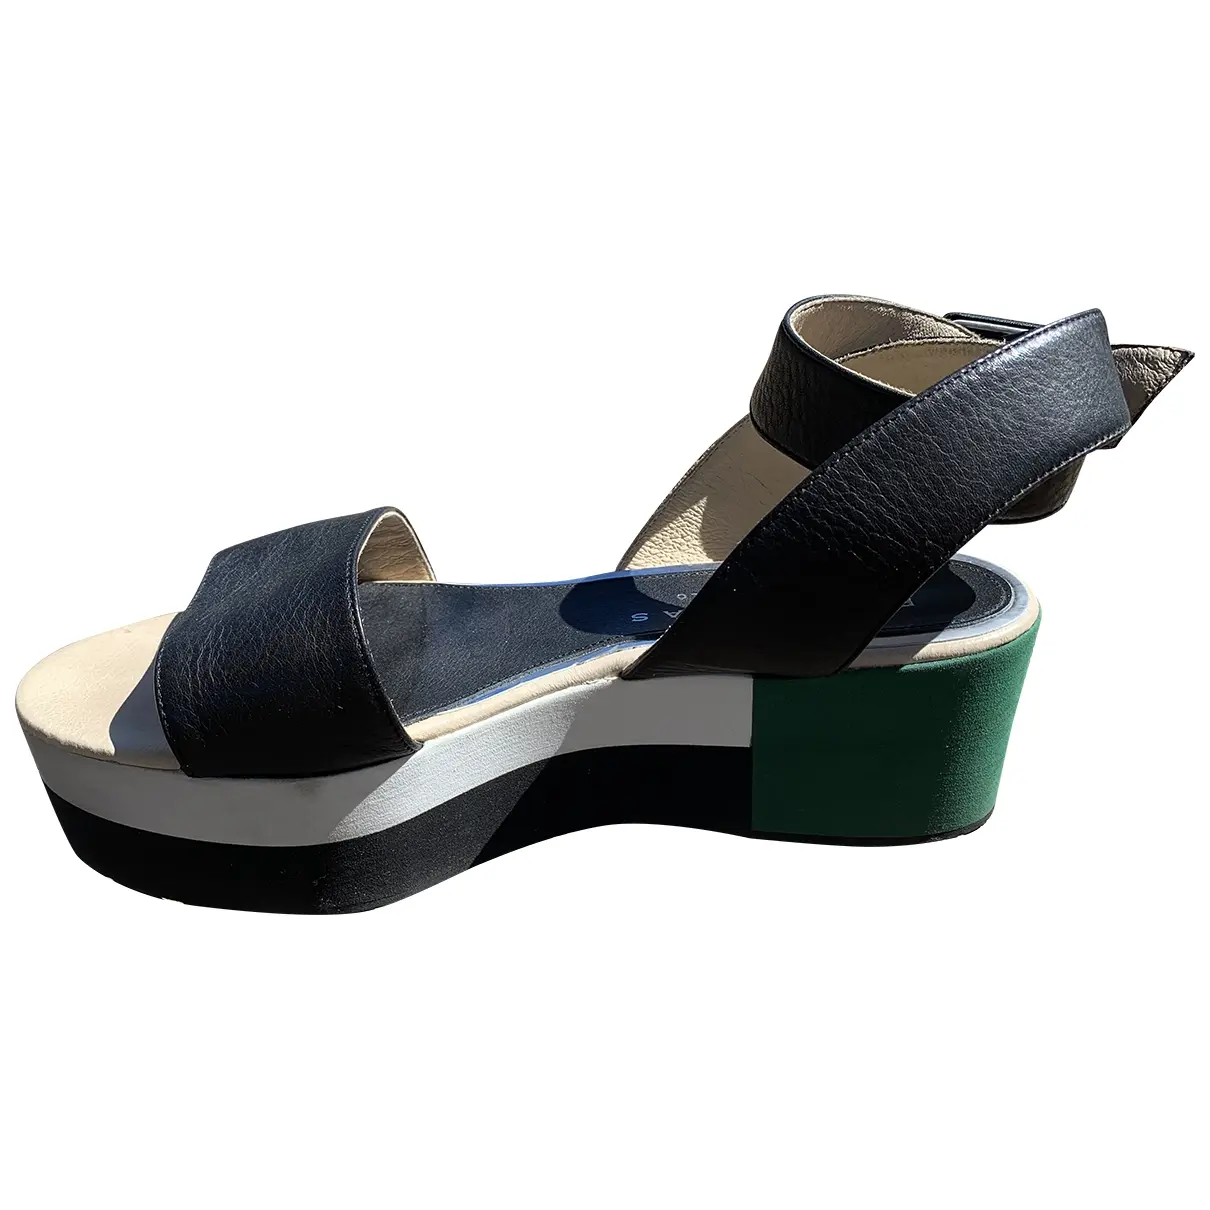 Leather sandals Paloma Barcelo